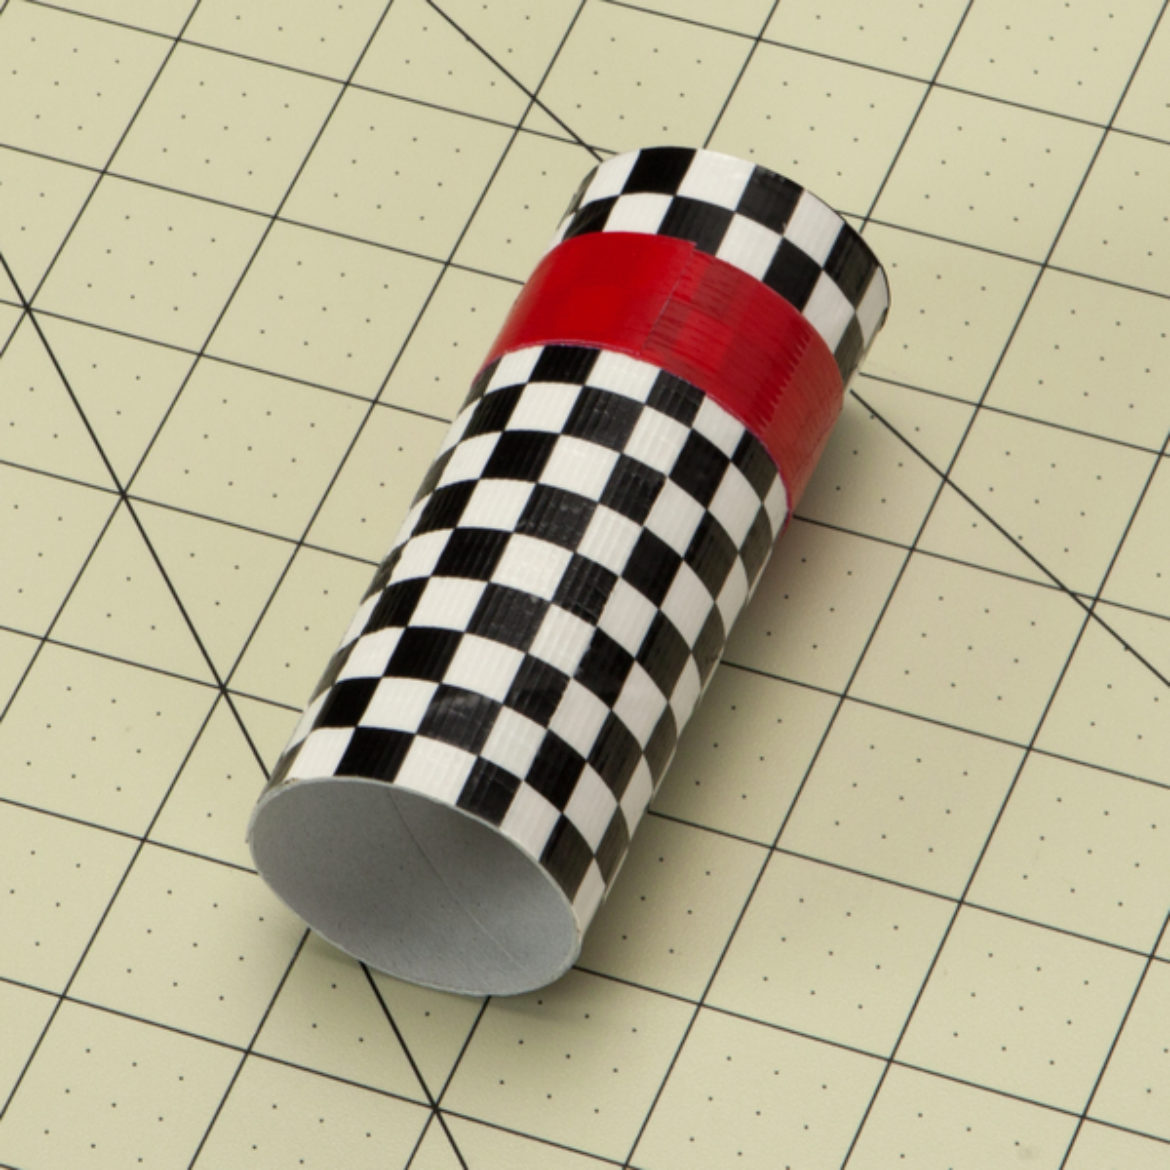 Duck Taped cardboard tube with a red strip added to the top half